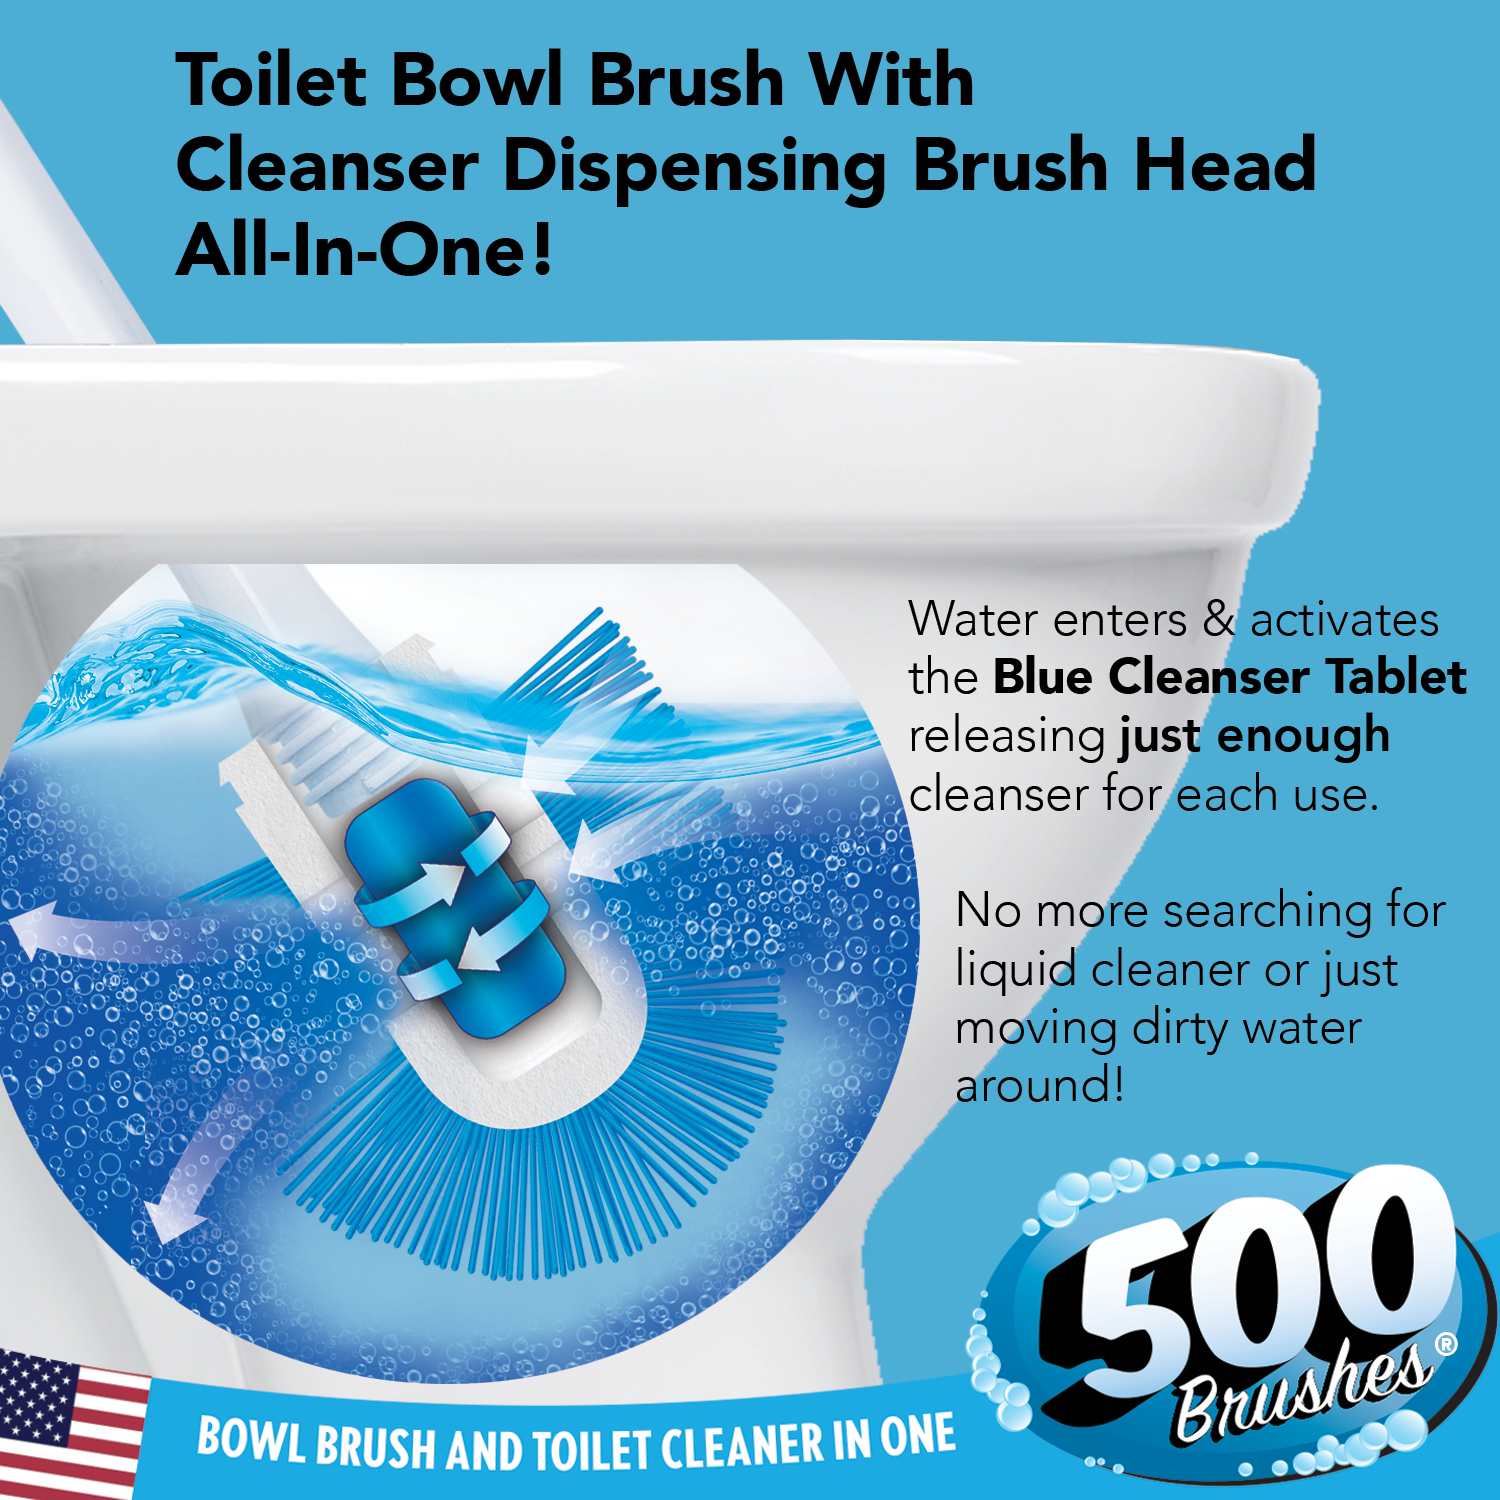 500 BRUSHES STARTER PLUS KIT, TOILET BOWL BRUSH W/ CLEANSER DISPENSING BRUSH HEAD, INCLUDES 2 BRUSH HEADS, 1 HANDLE, 1 CADDY AND 5 BLUE CLEANSER CARTRIDGES, ITEM #3304